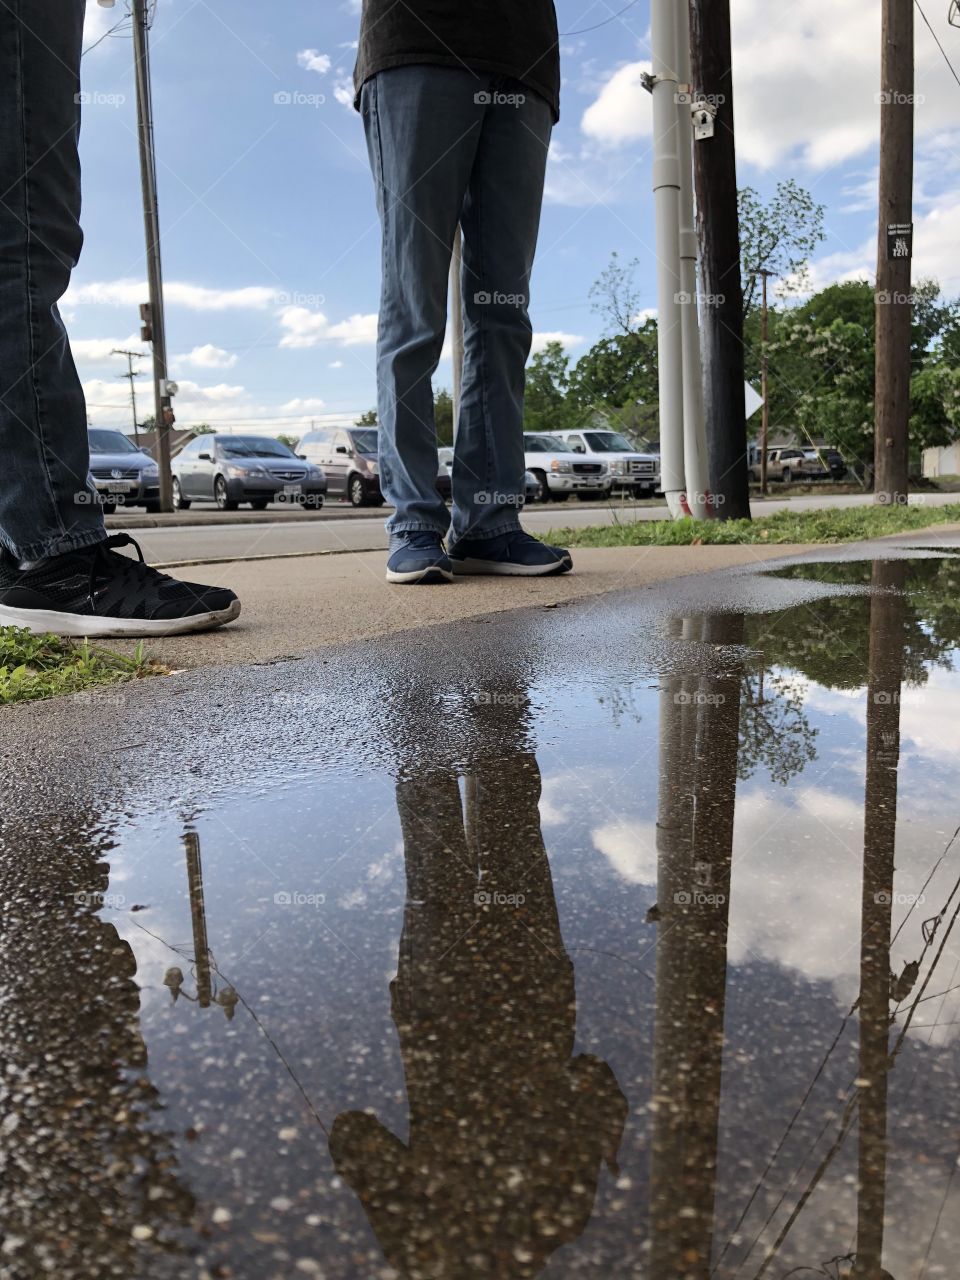 Feet reflected in puddle with parked cars in background